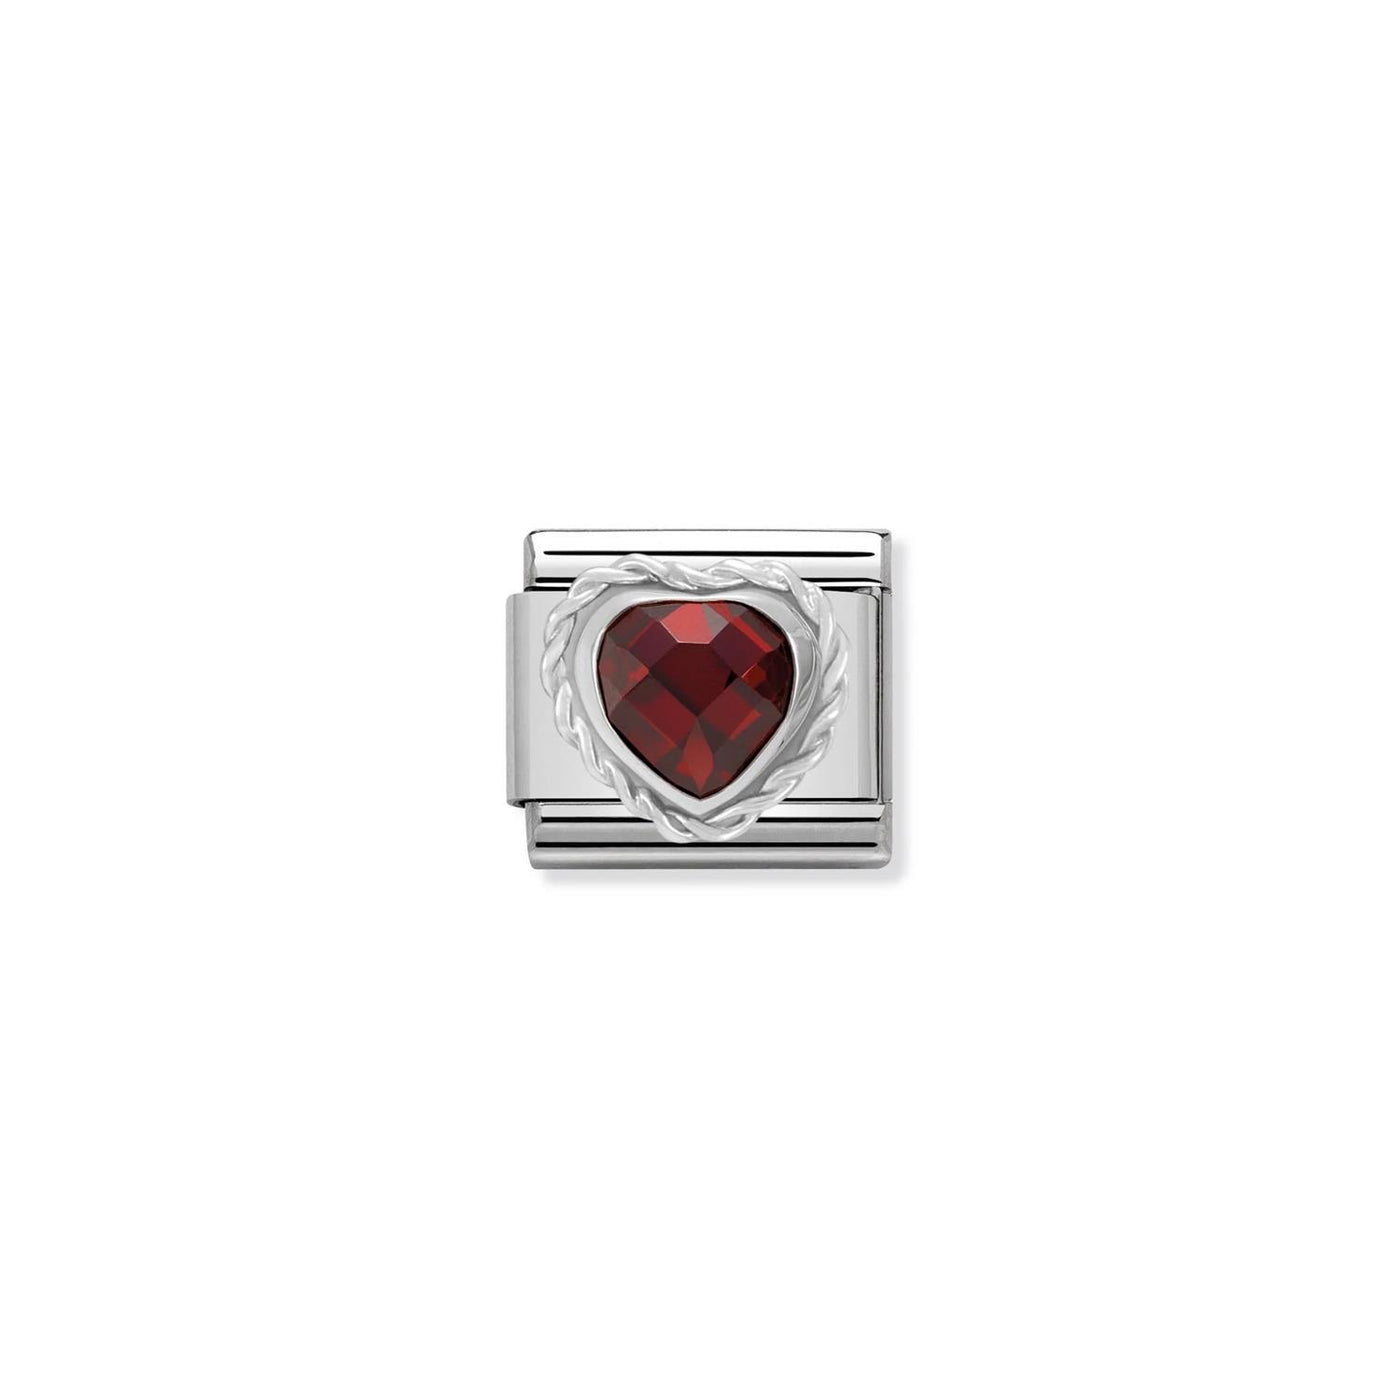 Heart Faceted CZ 925 sterling silver twisted setting and CZ Red